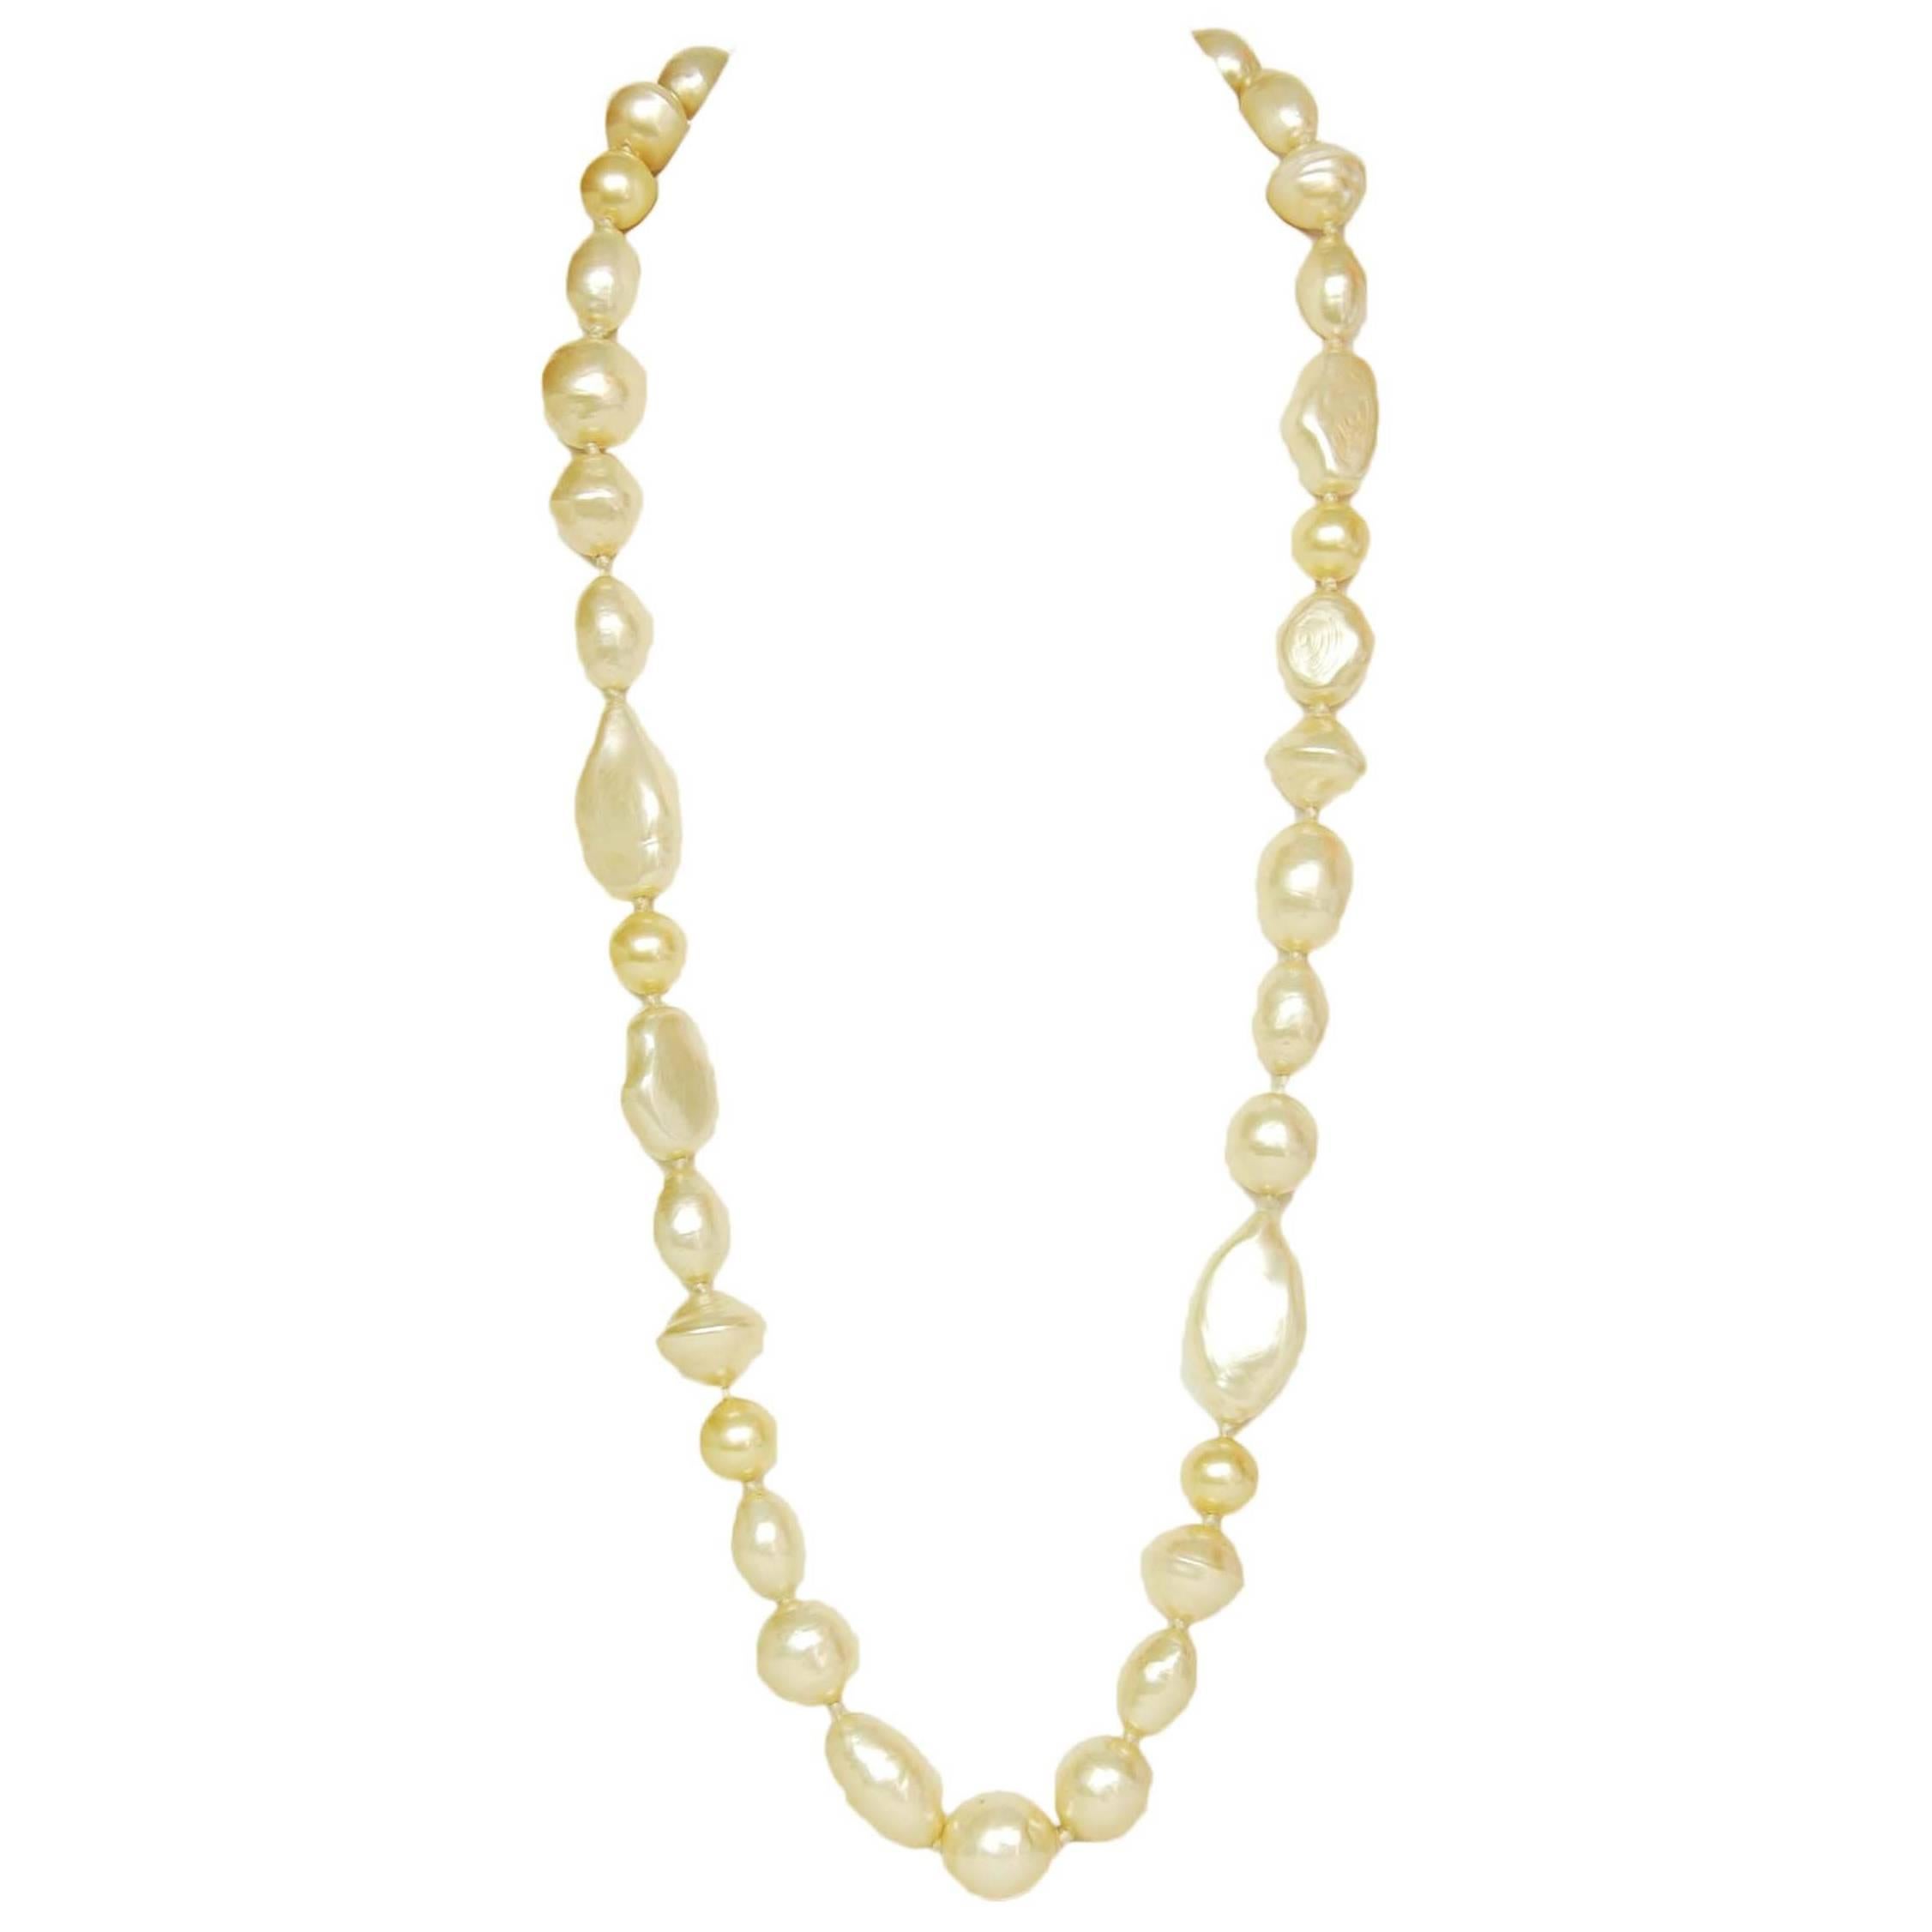 Chanel Vintage '83 Long Pearl Strand Necklace
Features different shaped faux pearls with red gripoix closure 

Year of Production: 1983
Color: Ivory, goldtone and red
Materials: Faux pearls, red gripoix and metal
Closure: Hook closure
Stamp: Chanel